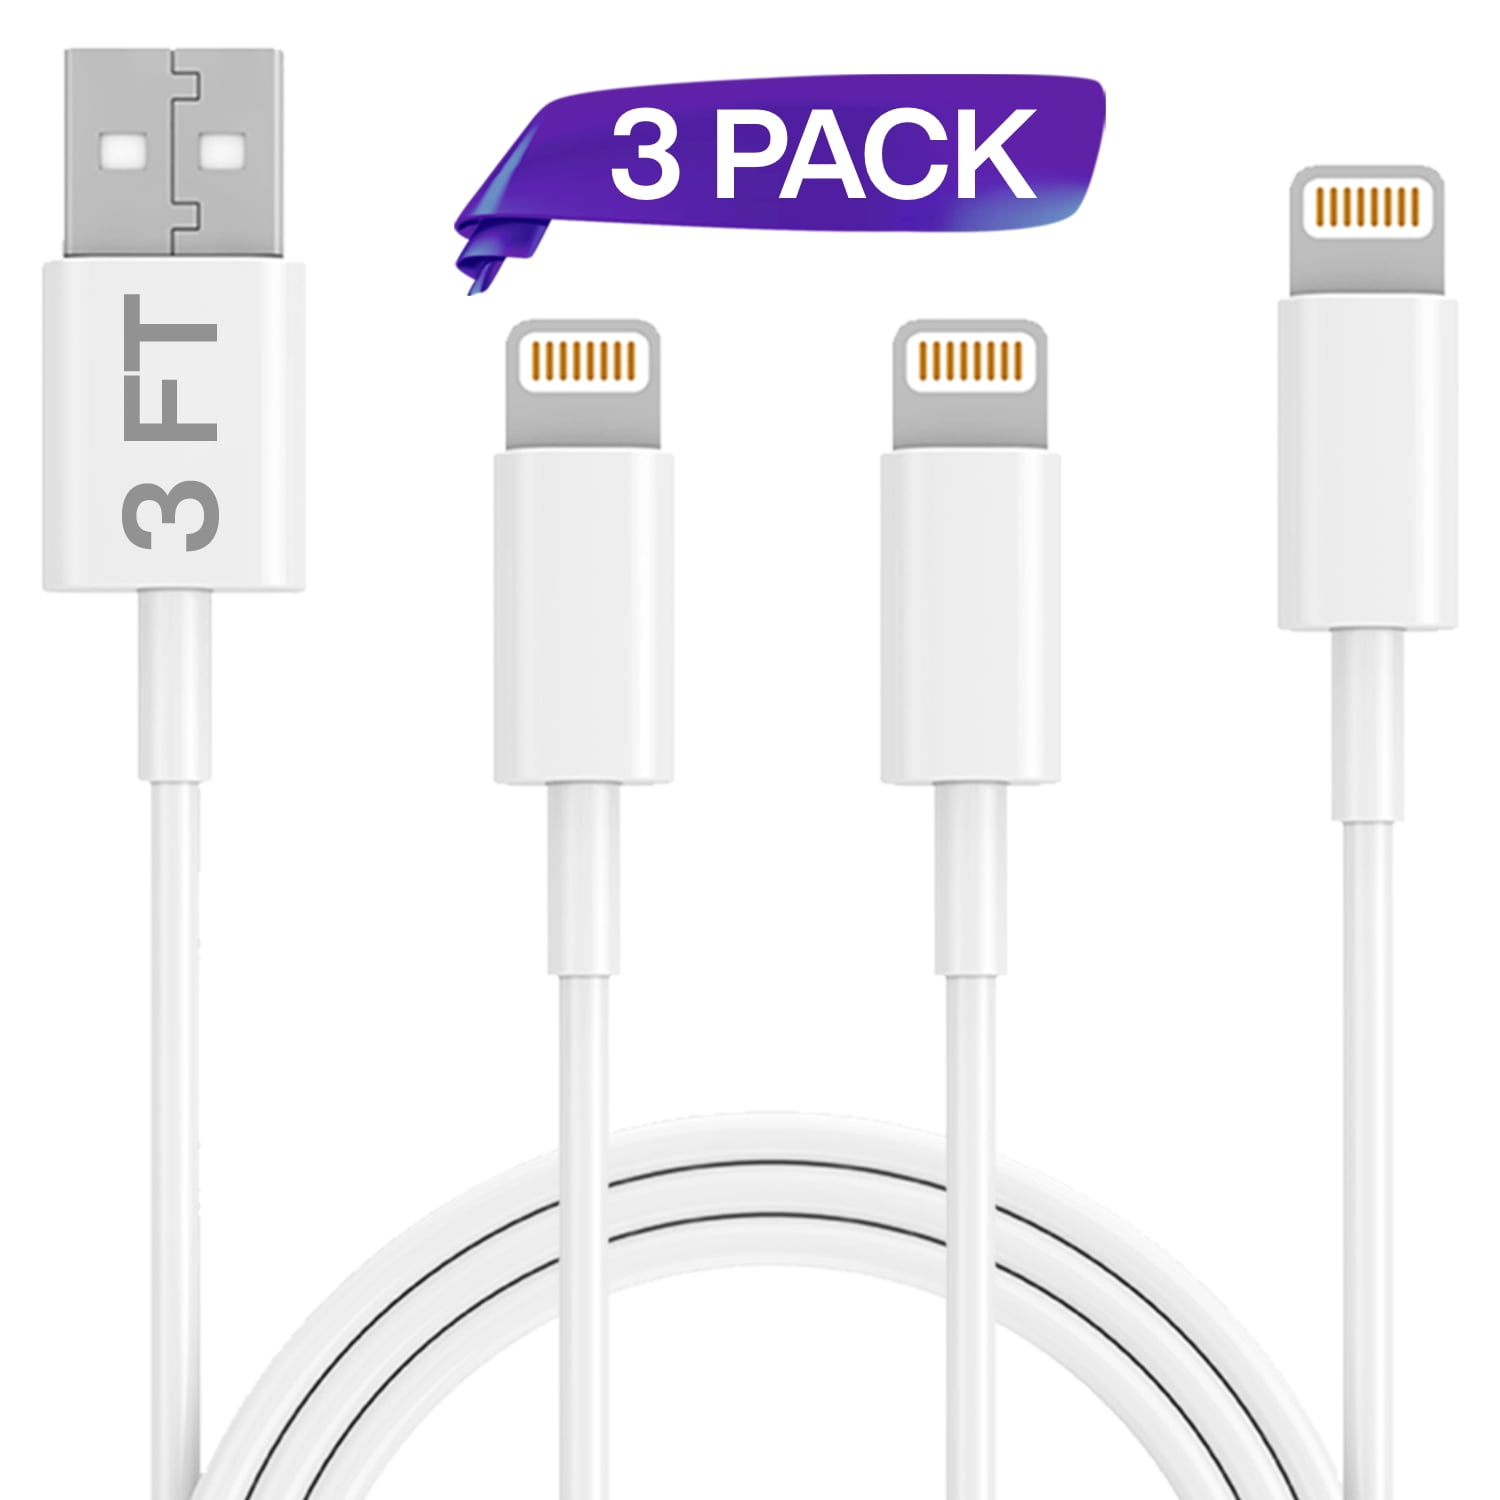 for Apple iPhone Xs,Xs Max,XR,X,8,8 Plus,7,7 Plus,6S,6S Plus,iPad Air,Mini/iPod Touch/Case iPhone Charger Lightning Cable Infinite Power MFI Certified 2 Pack 6FT USB Cable Fast Syncing Cord